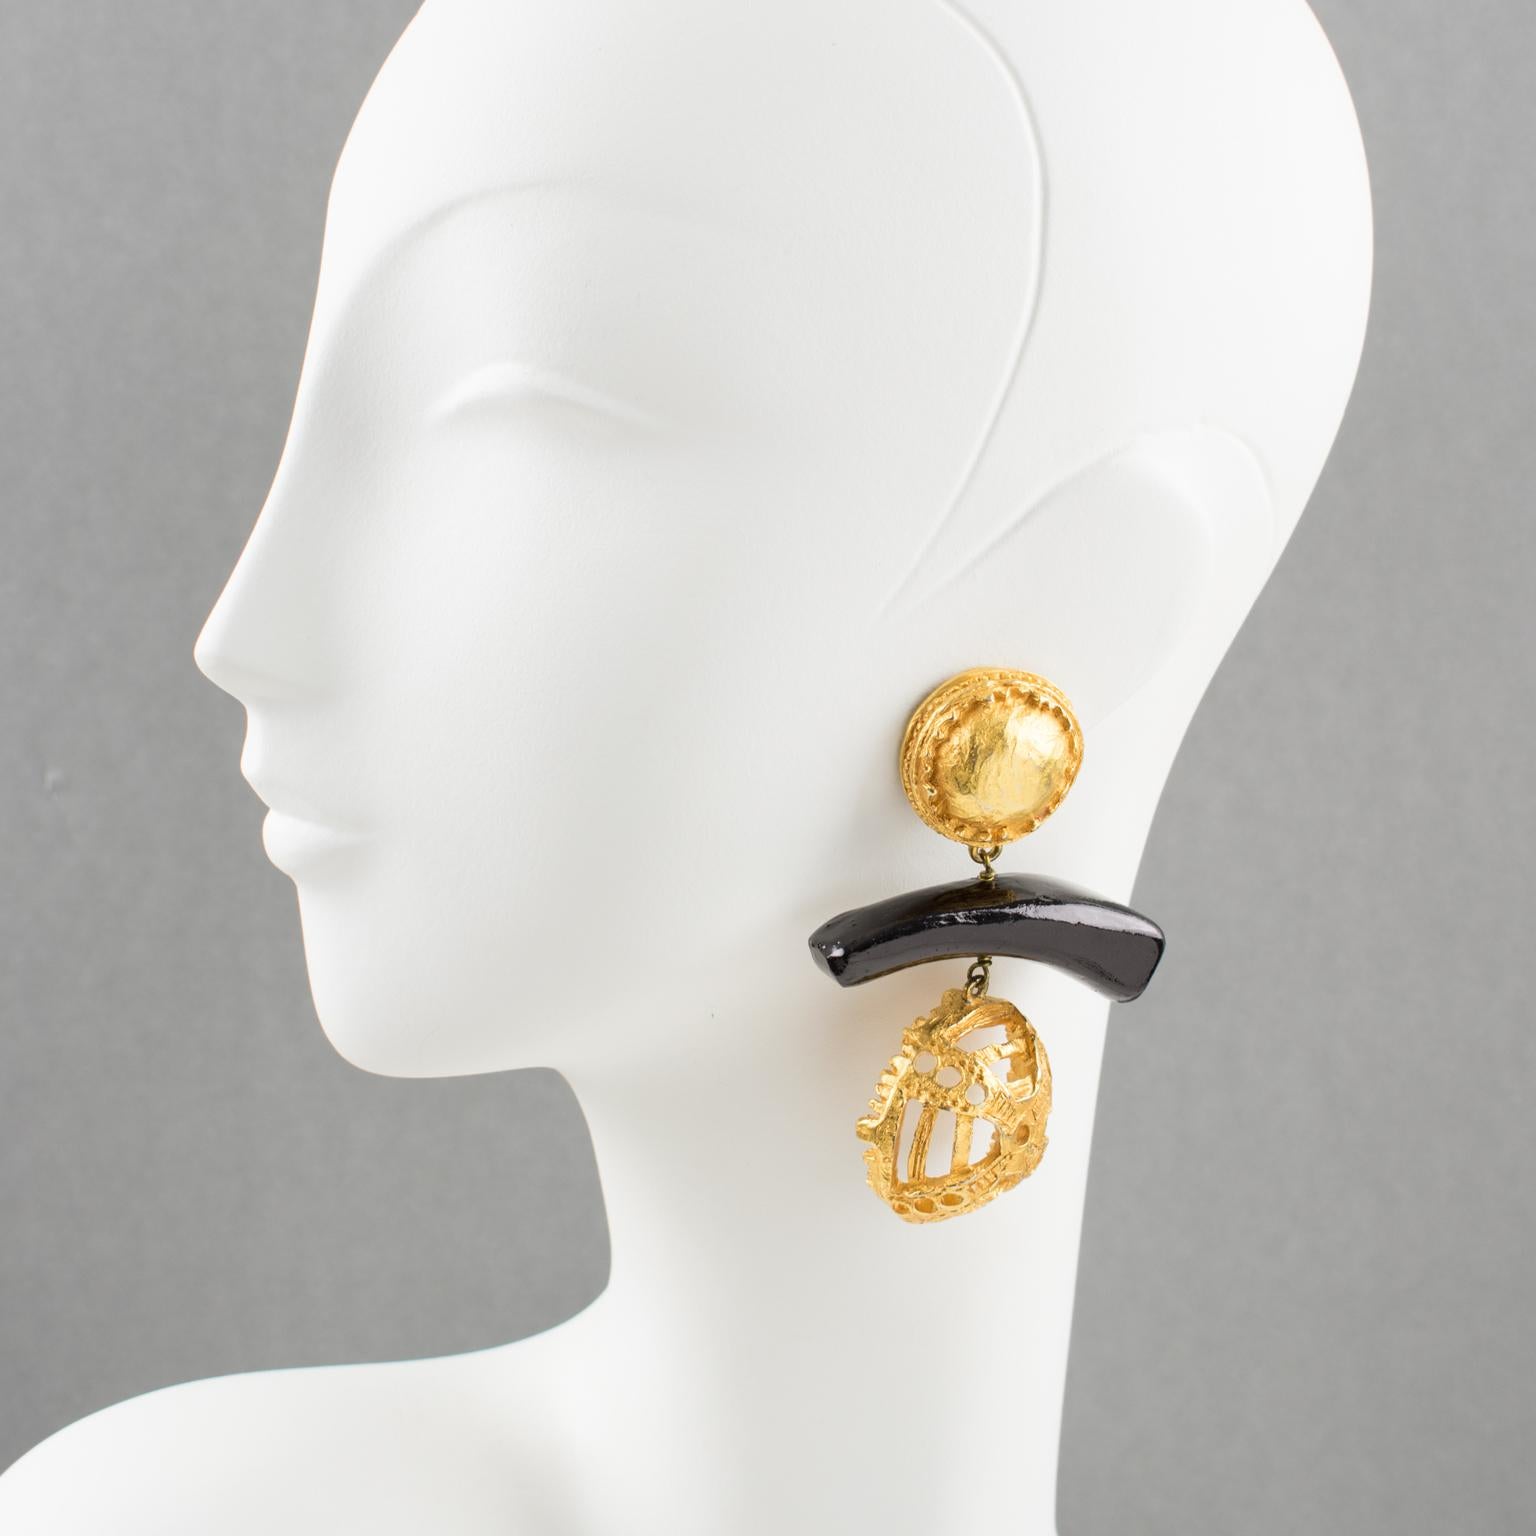 Stunning Christian Lacroix Paris signed tribal clip-on earrings. Oversized gilt metal dangling shape, metal all textured and see thru, ornate with a large varnish carved wood element. Signed on the gilded tag at the back: 'Christian Lacroix - CL -